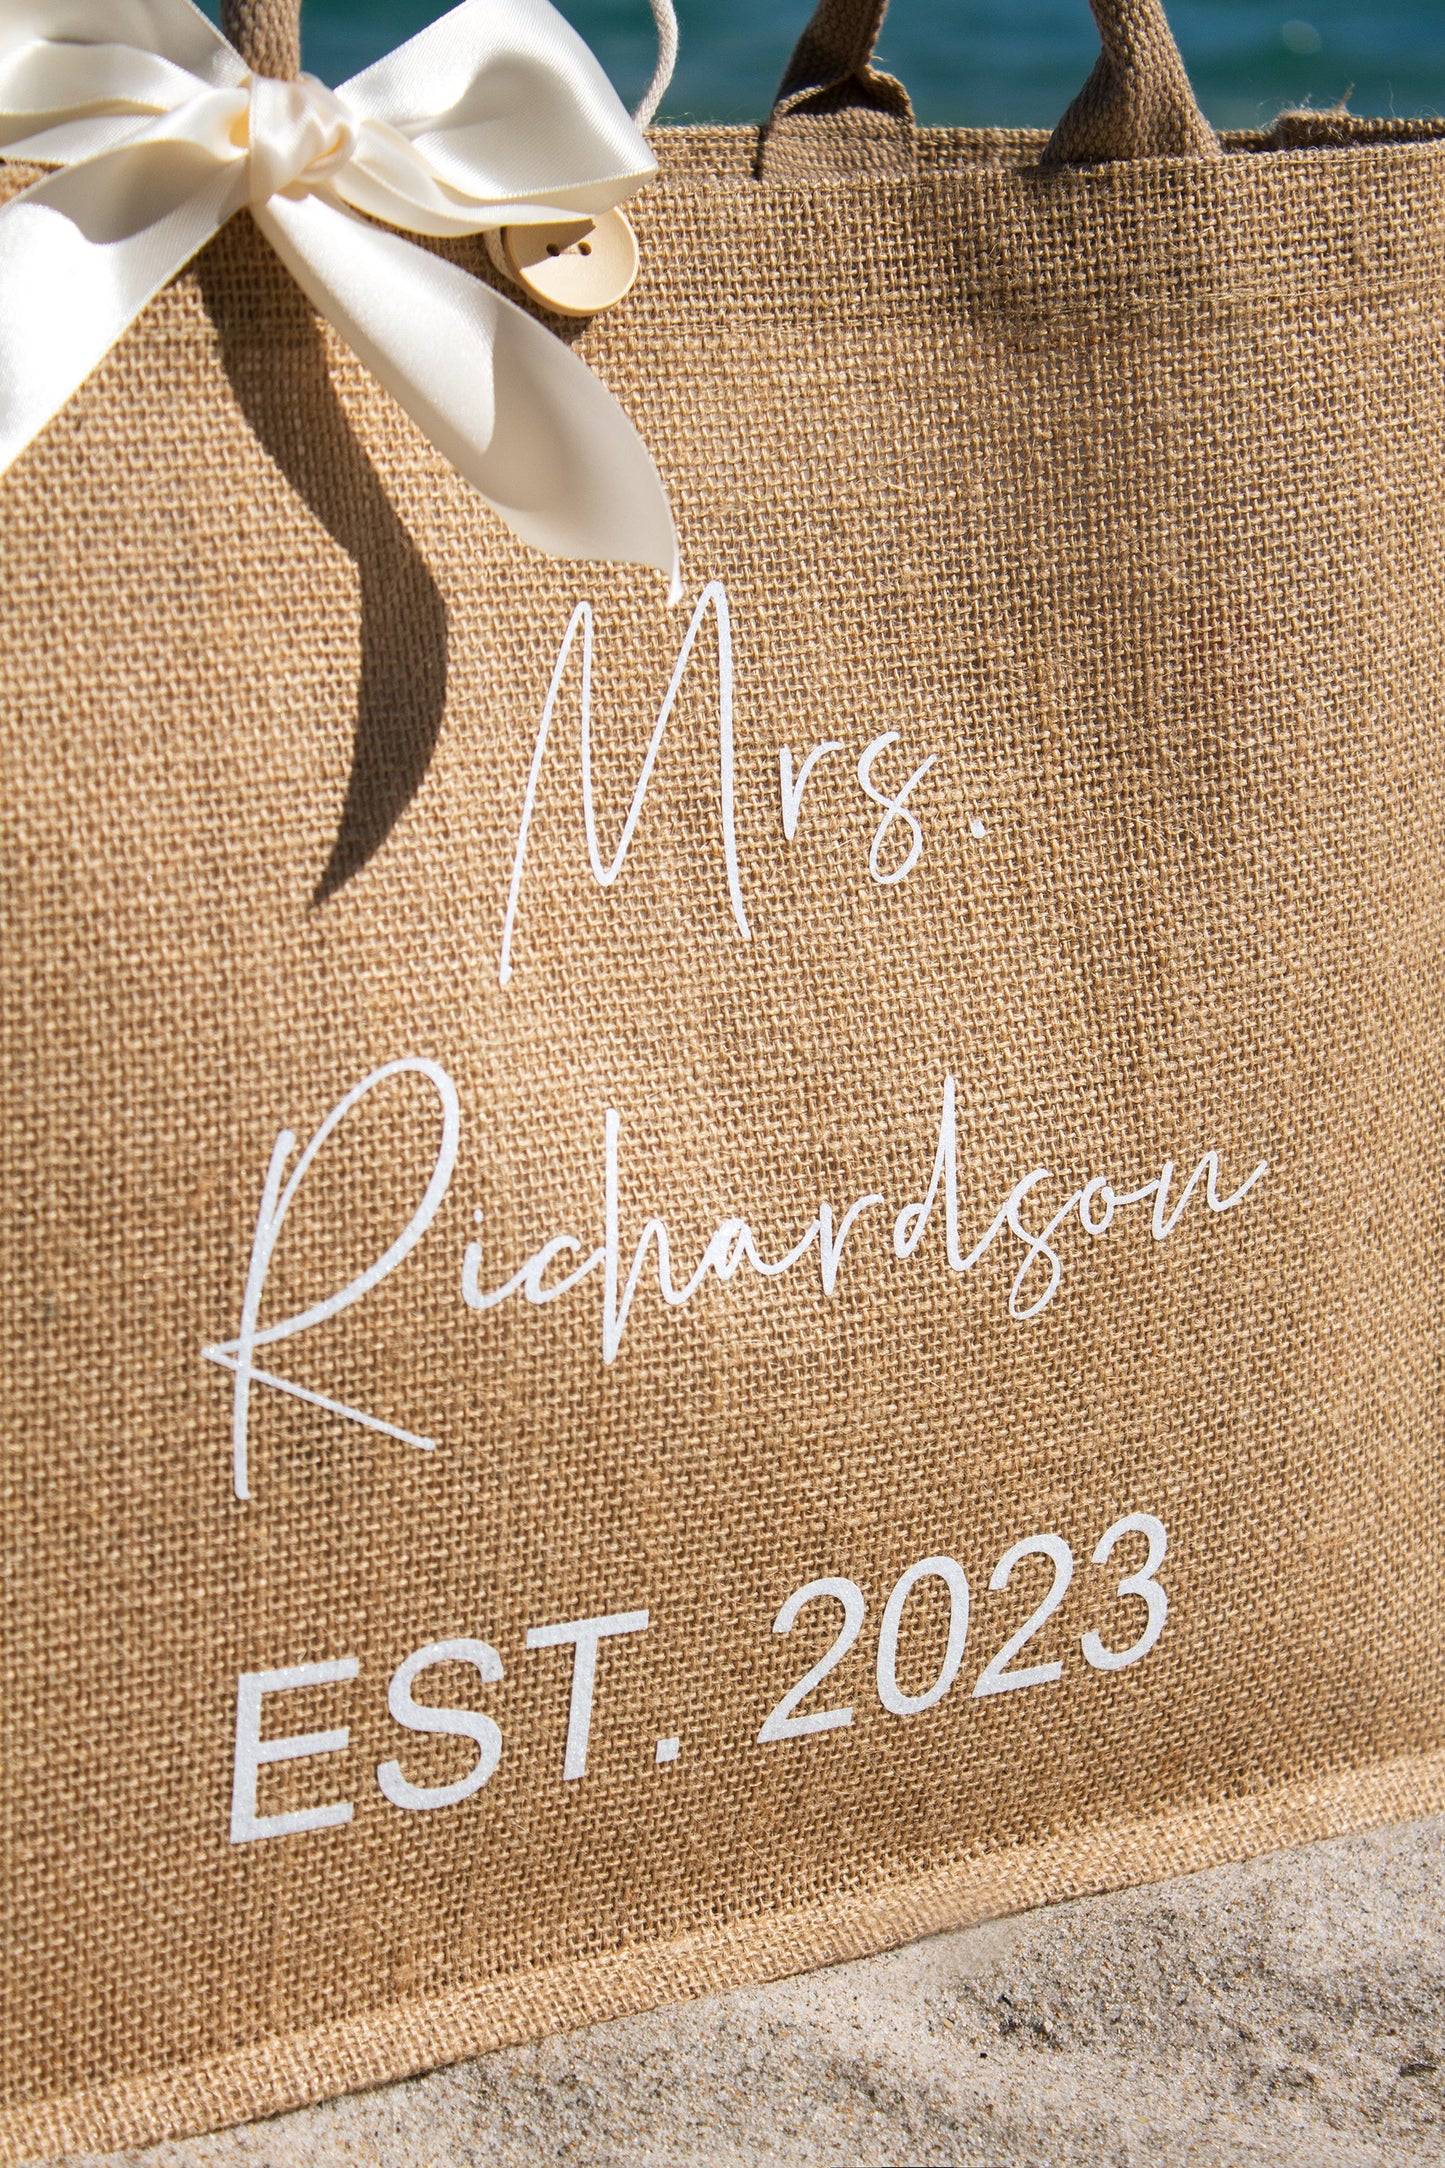 Personalized Bridal Tote Bag - Style 6